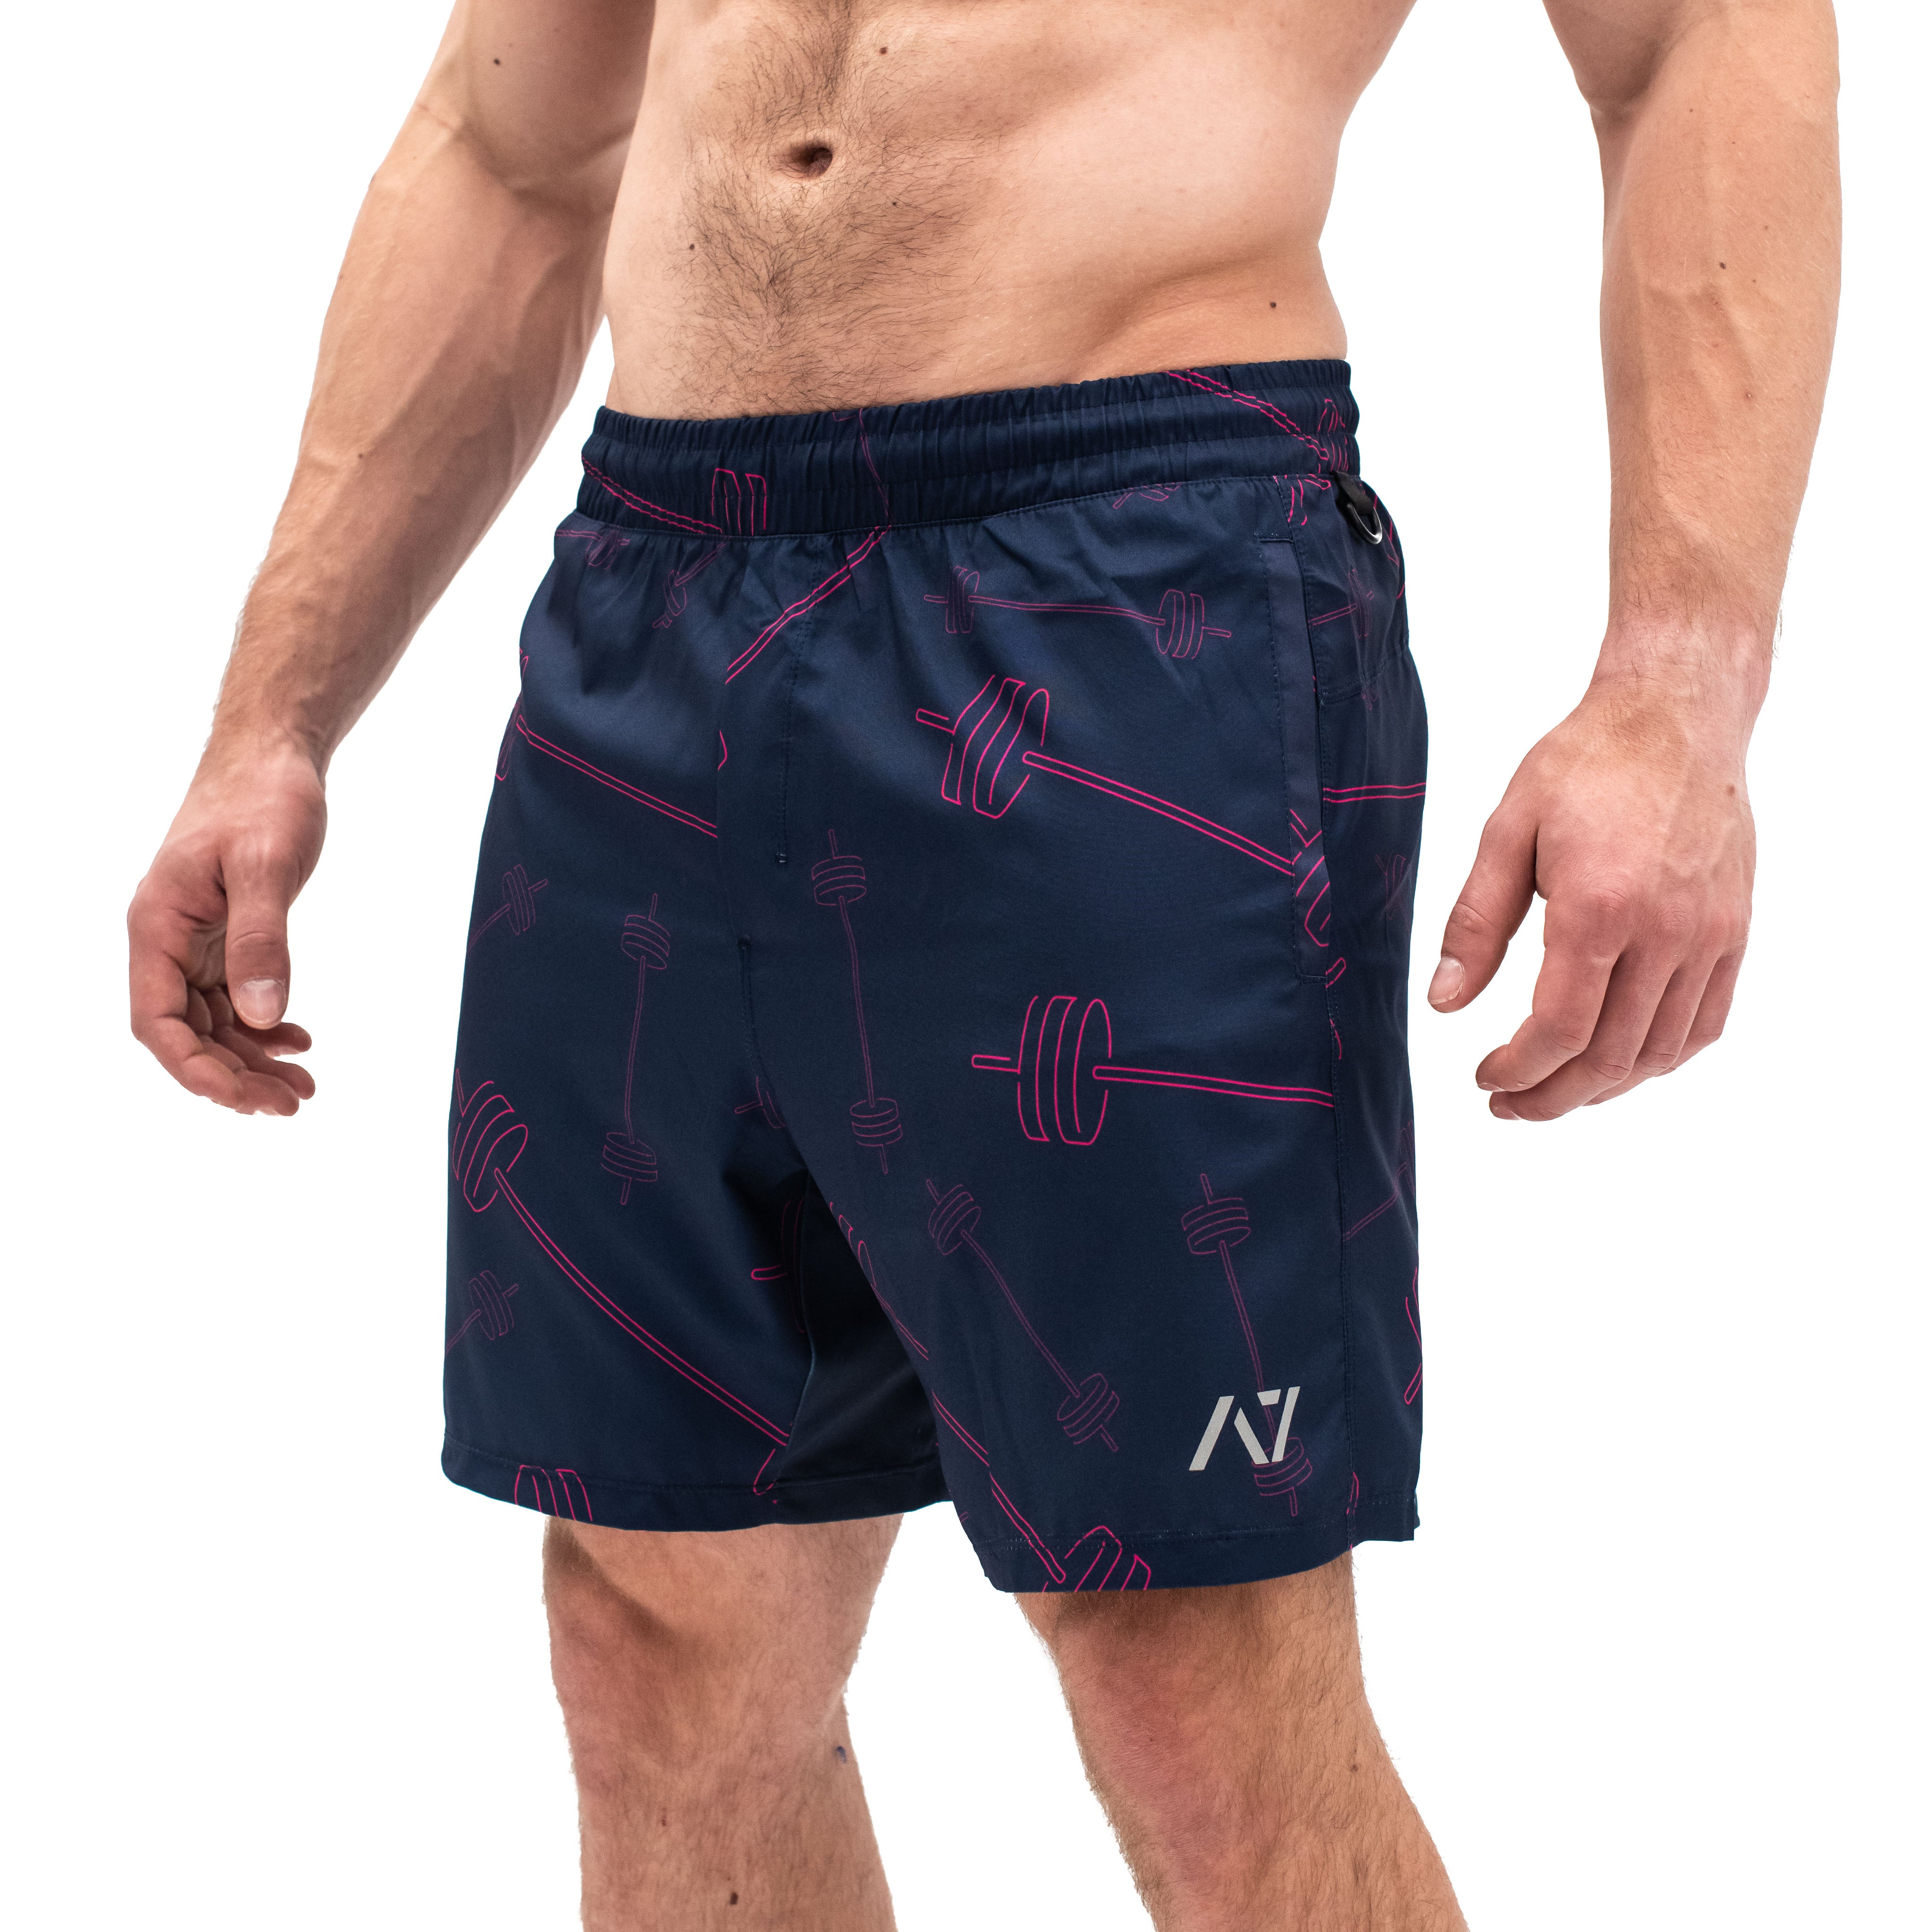 Have you ever squatted in shorts and realised that they may be too tight on you at the bottom of a squat? We have solved this problem with A7 Centre-stretch Squat Shorts. The shorts are made with stretchy fabric in between legs so you are never constricted during your squat. KWD shorts have a shorter inseam and are designed to show off your quads (KWaDs).